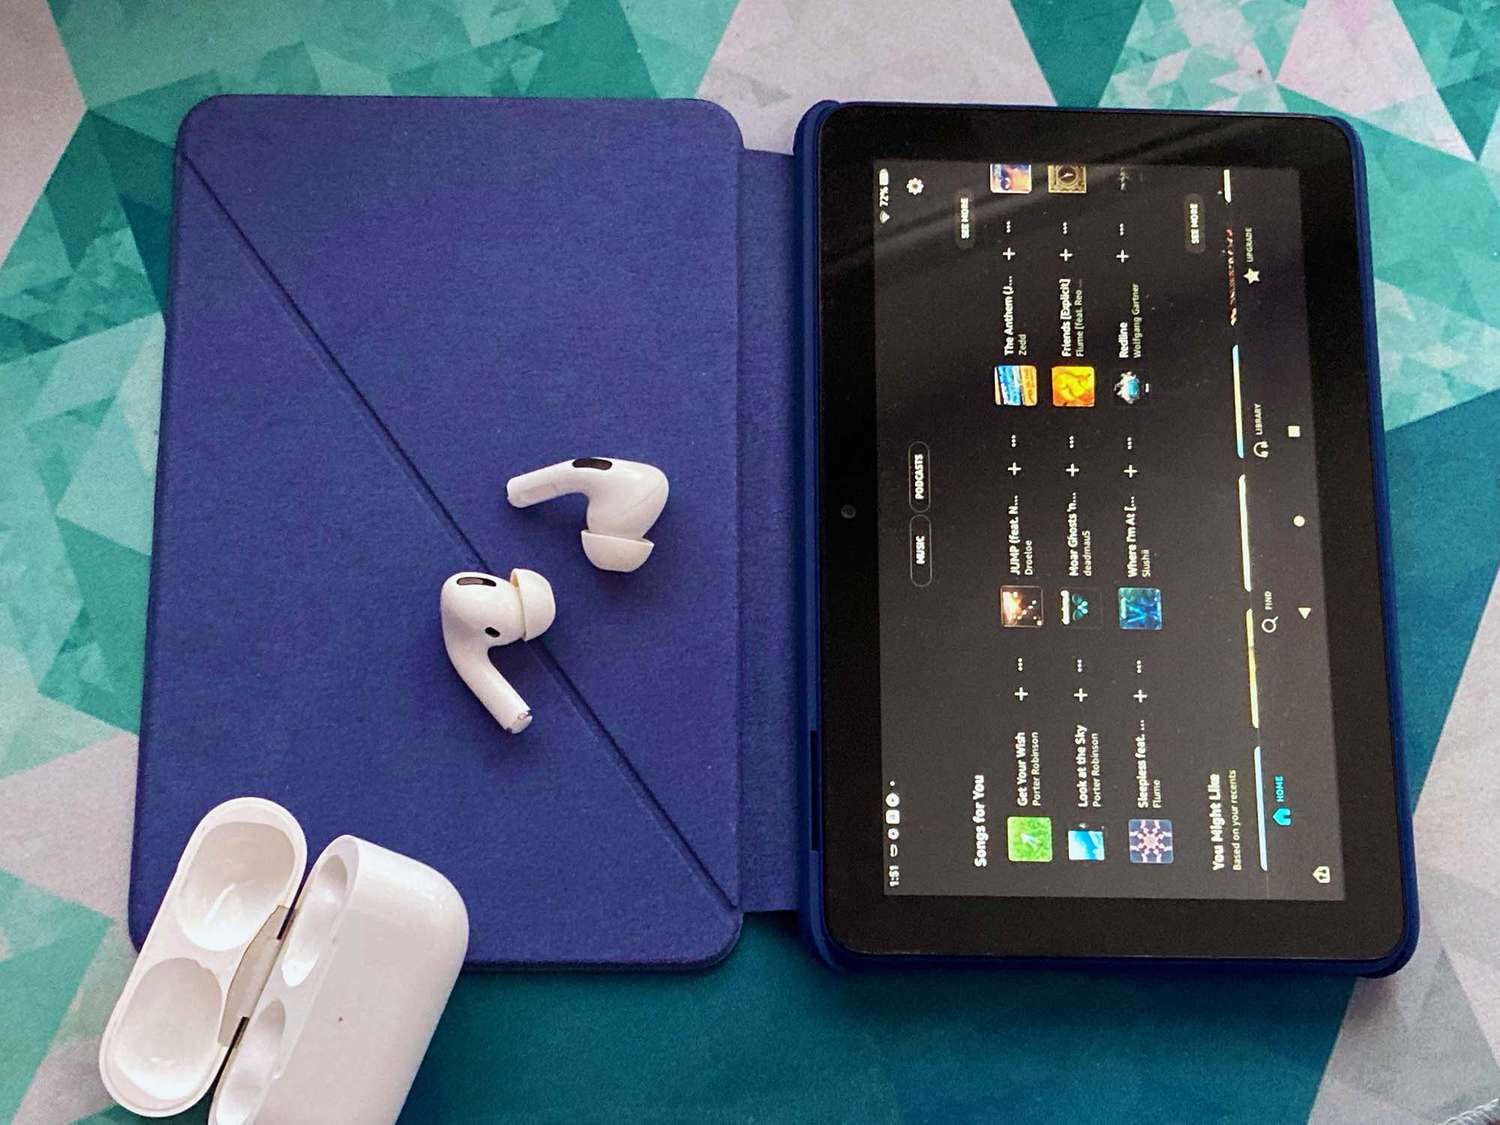 How To Pair Airpods With Fire Tablet